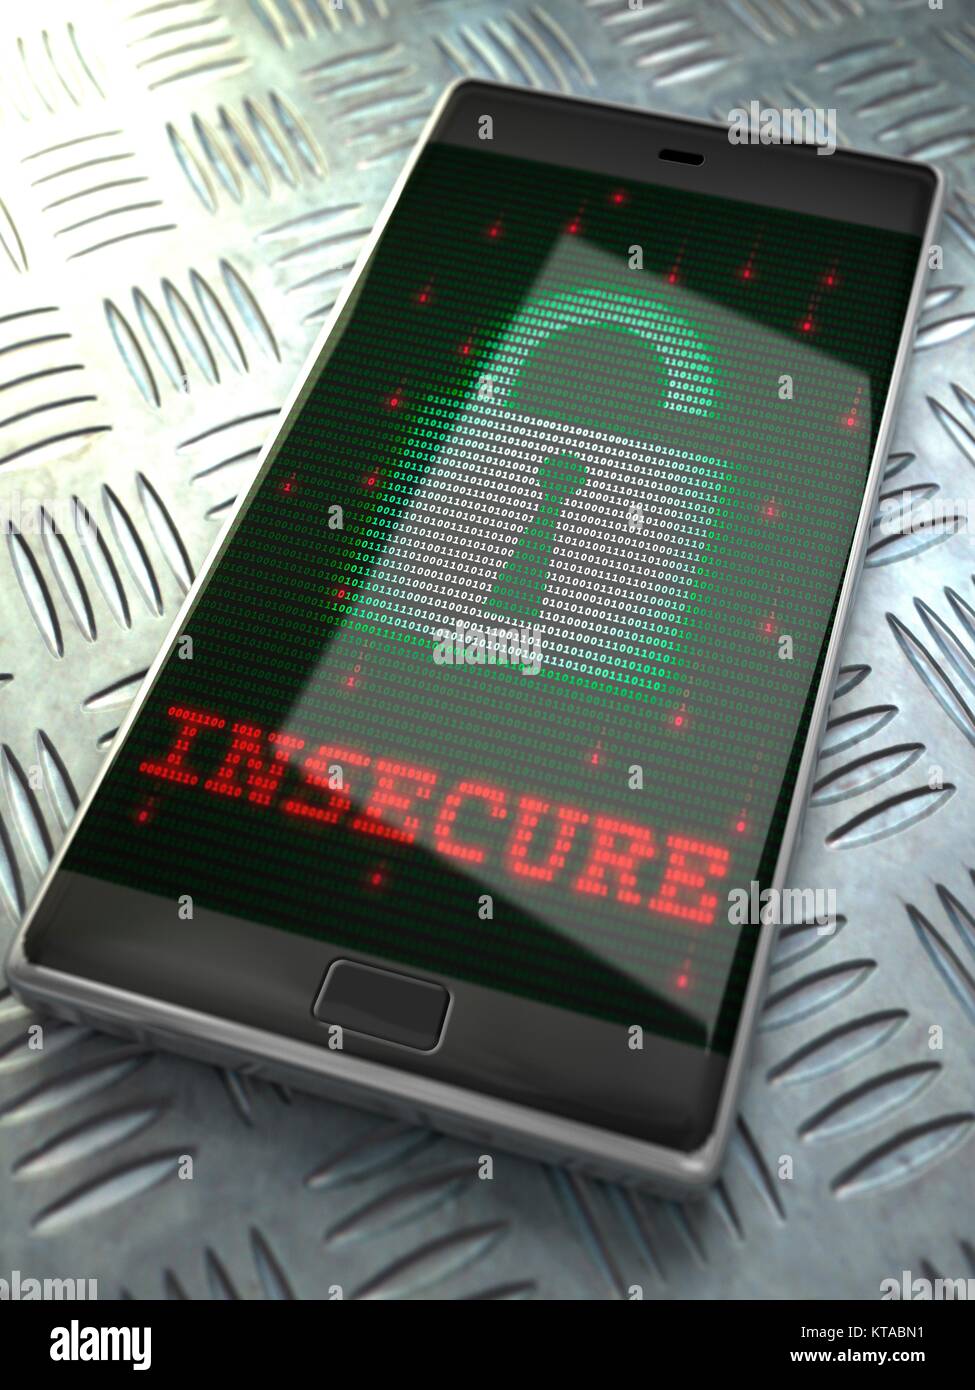 Smartphone and data security, illustration. A generic smartphone is shown with the word â€˜insecureâ€™ shown on its screen, along with an icon of a padlock made up from the binary digits, ones and zeros. Stock Photo